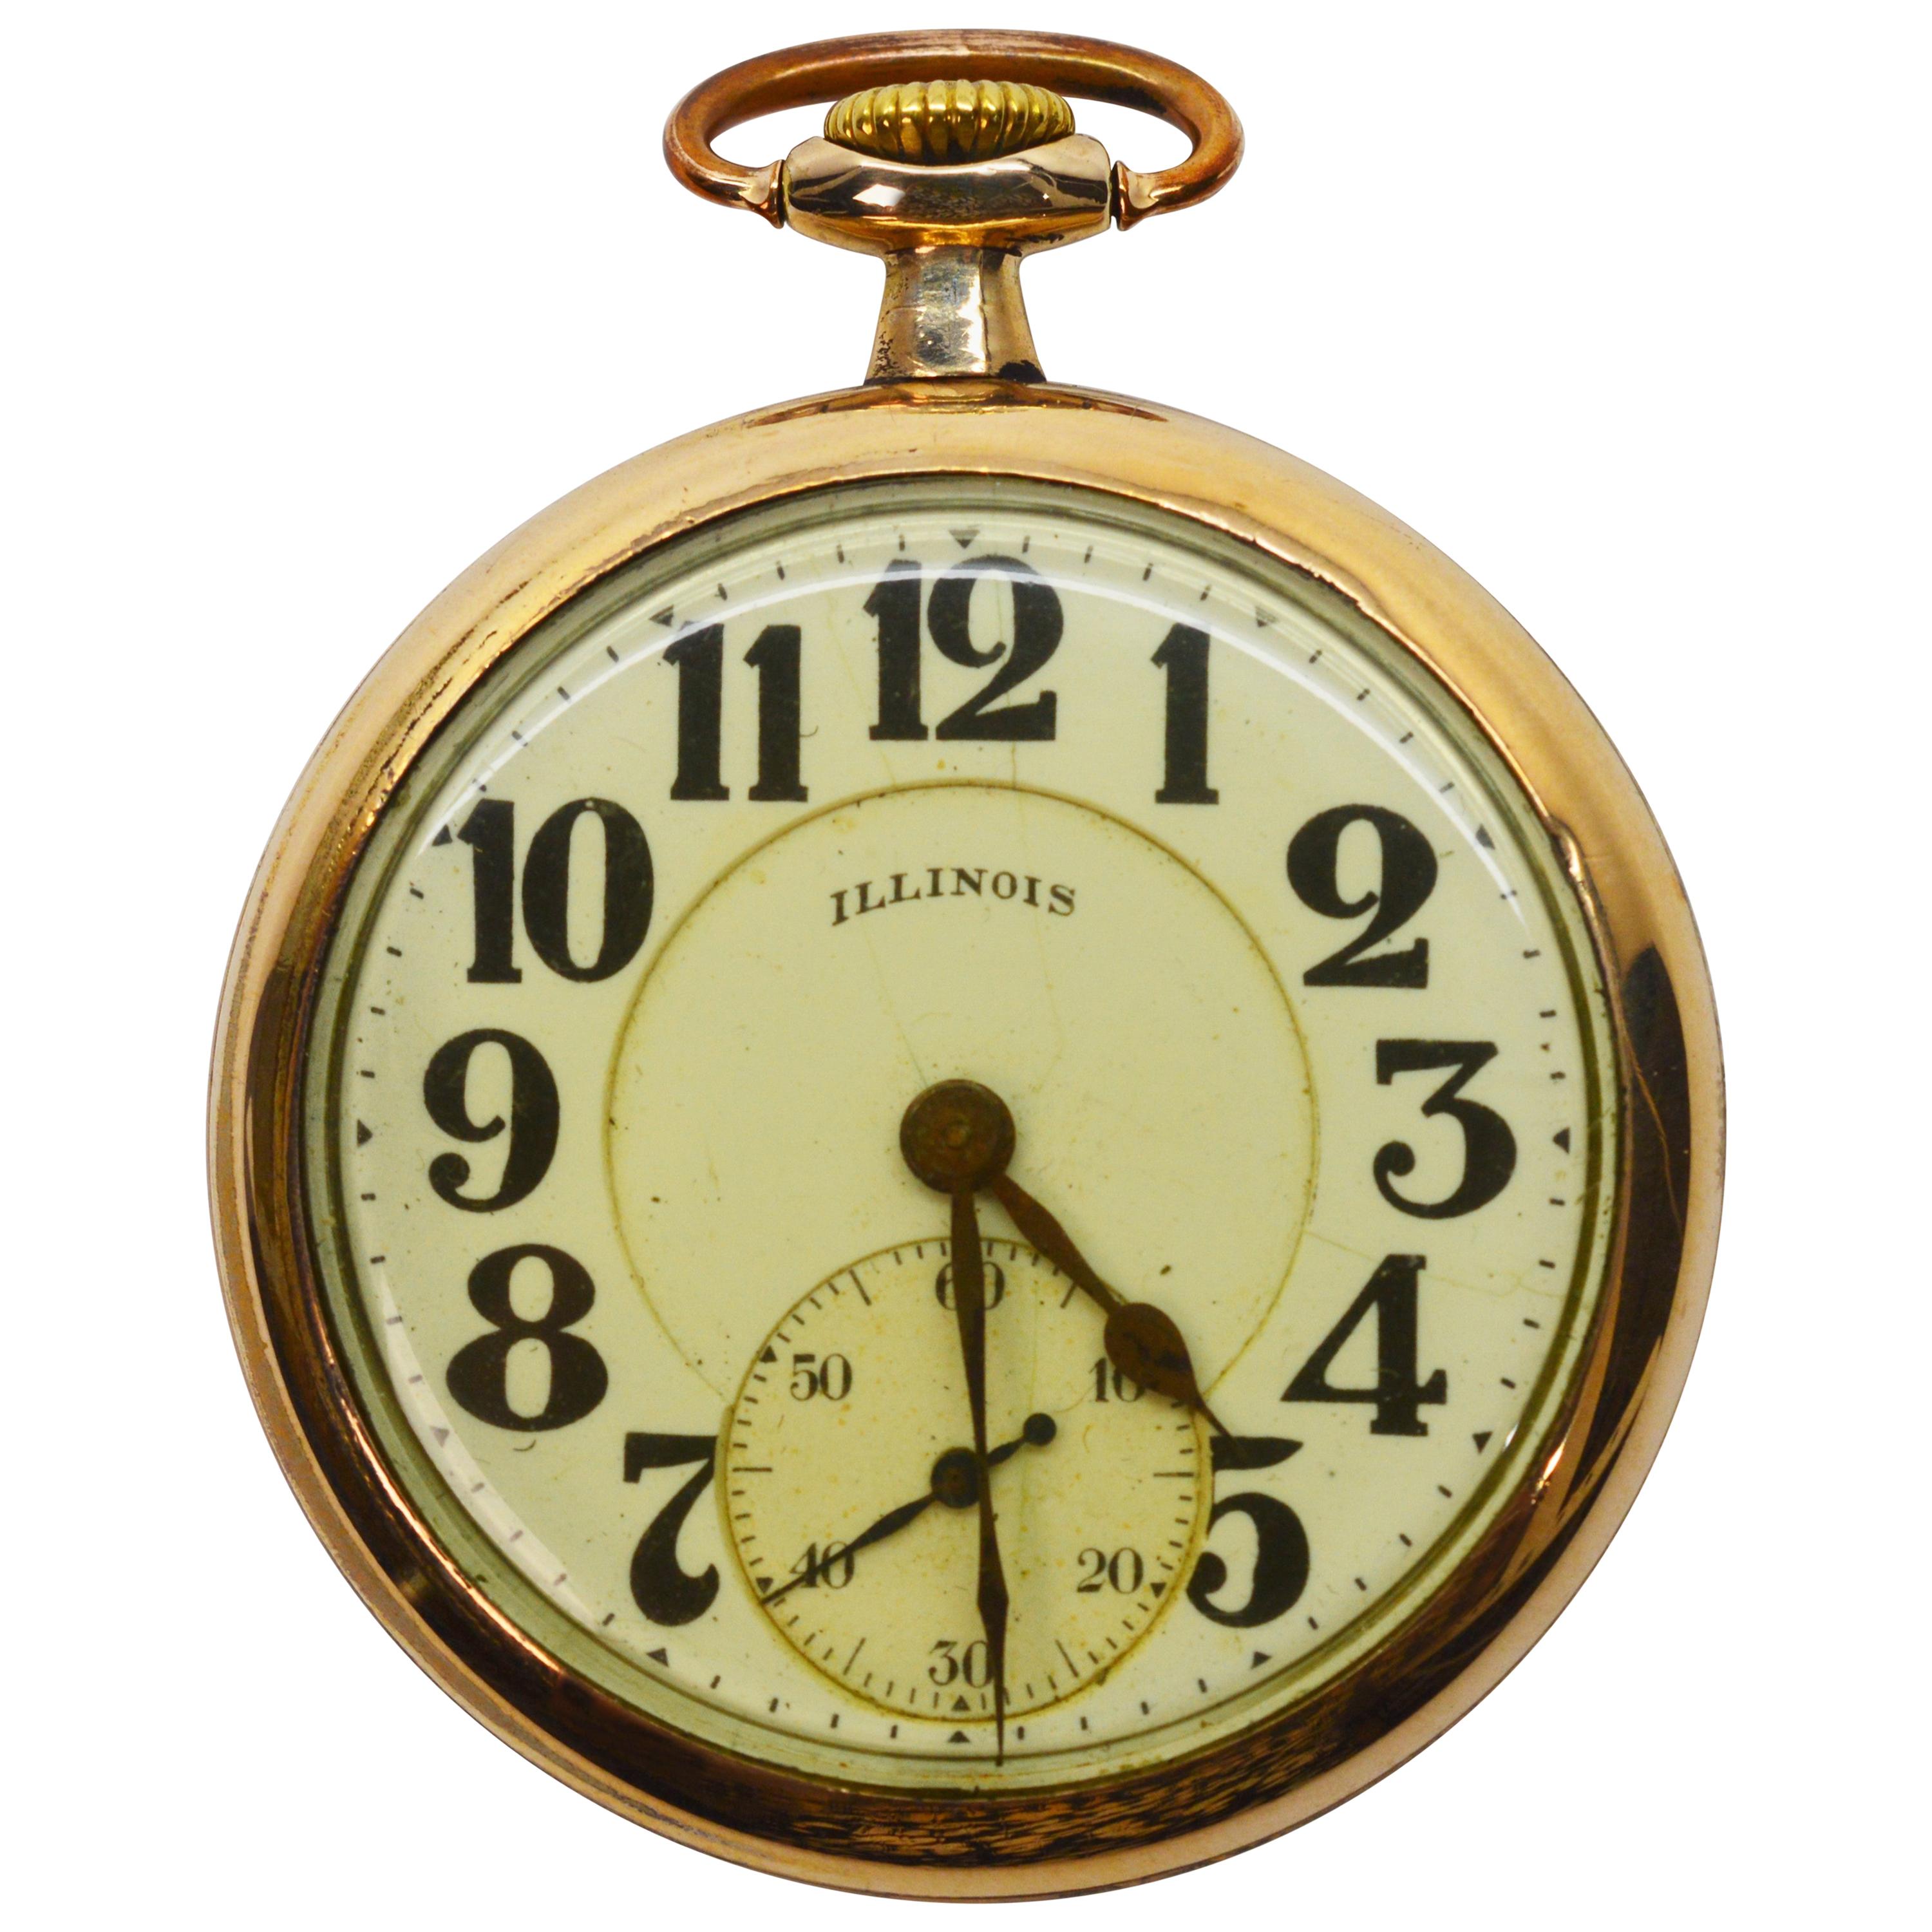 Illinois Bunn Special Brass Pocket Watch with Display Back